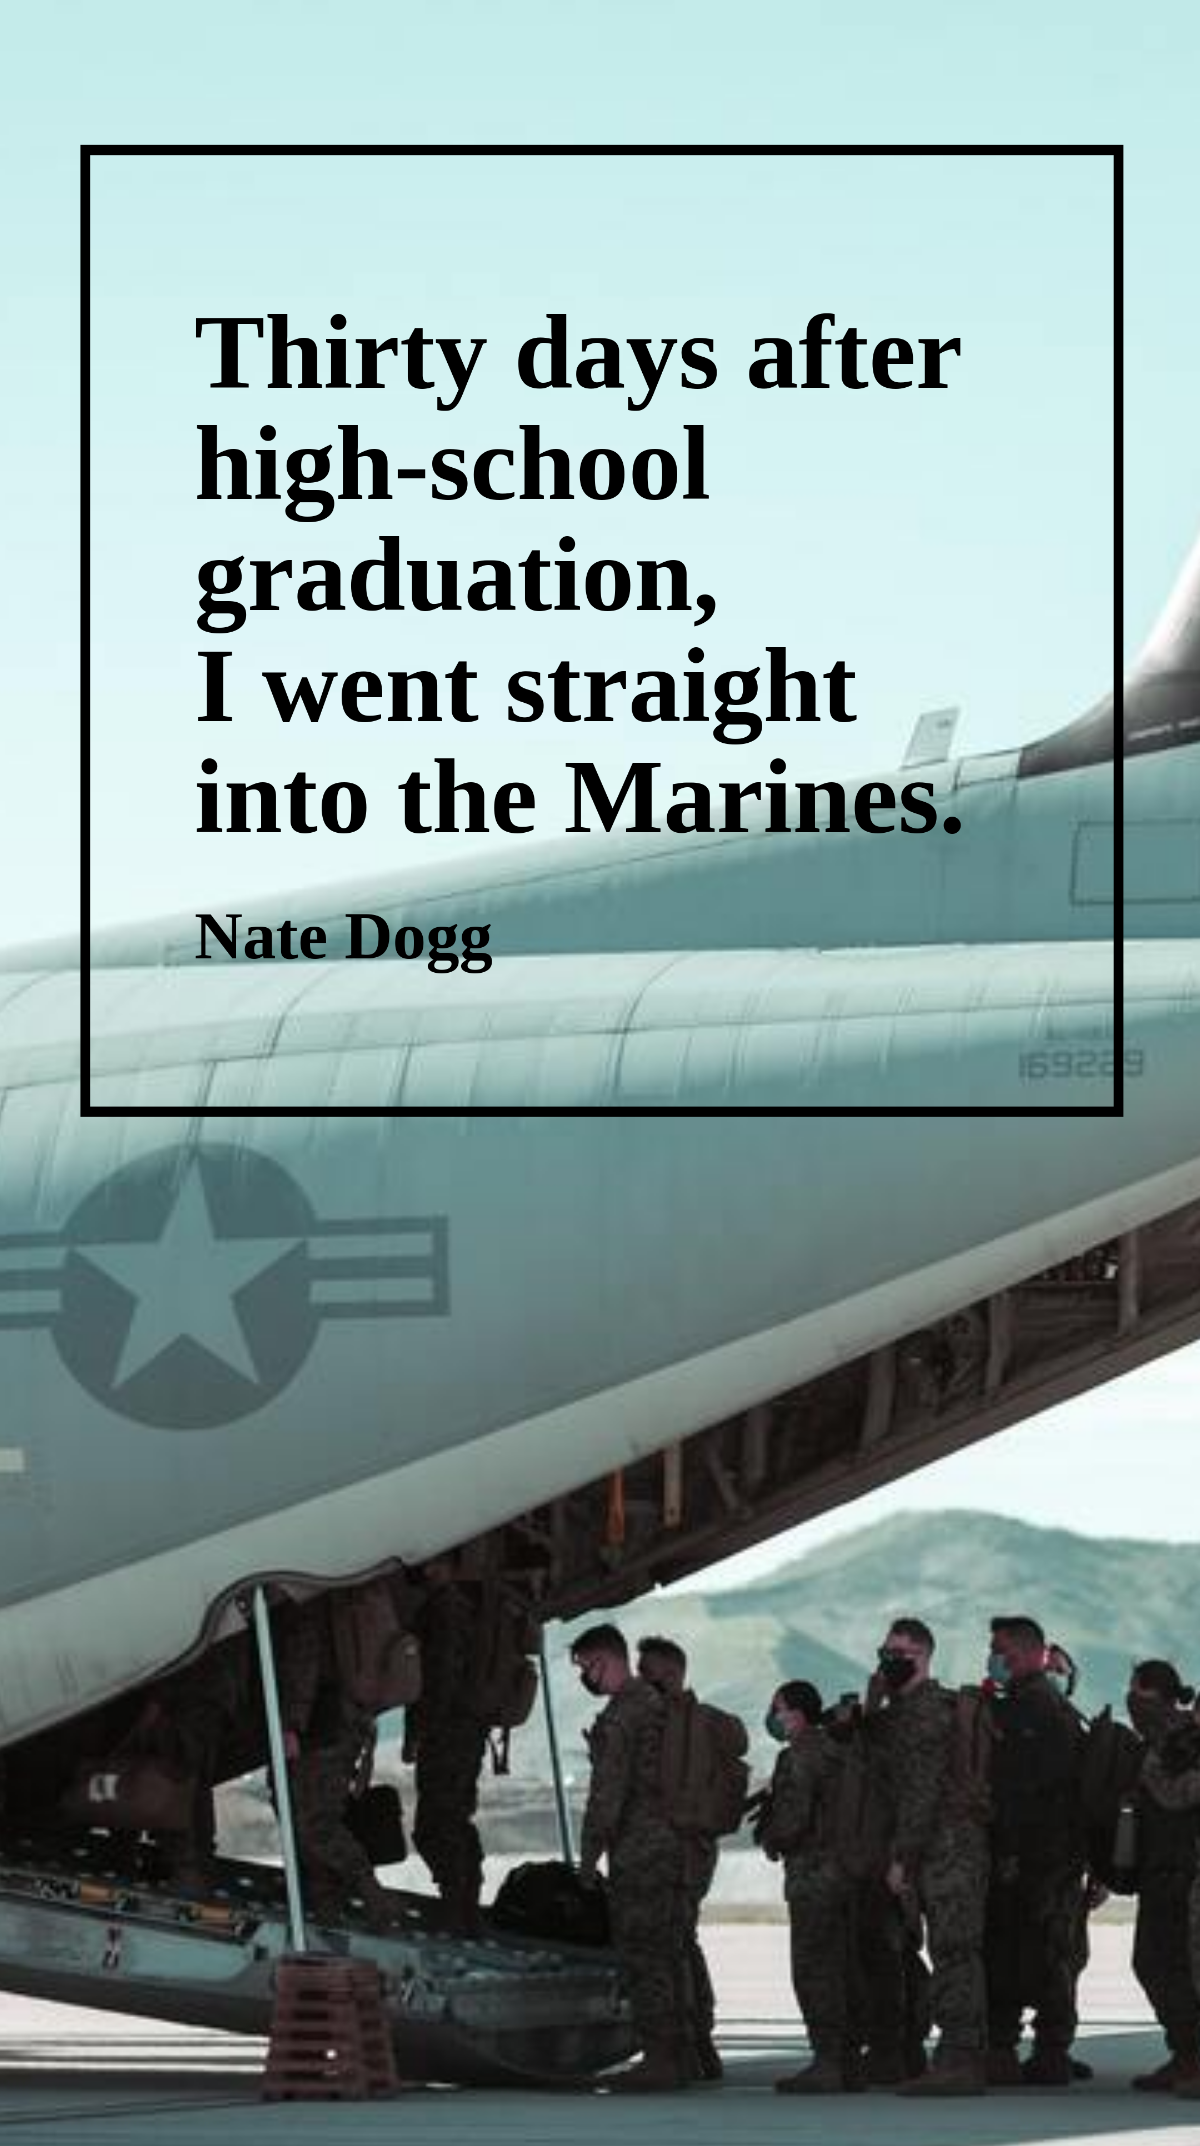 Nate Dogg - Thirty days after high-school graduation, I went straight into the Marines. Template